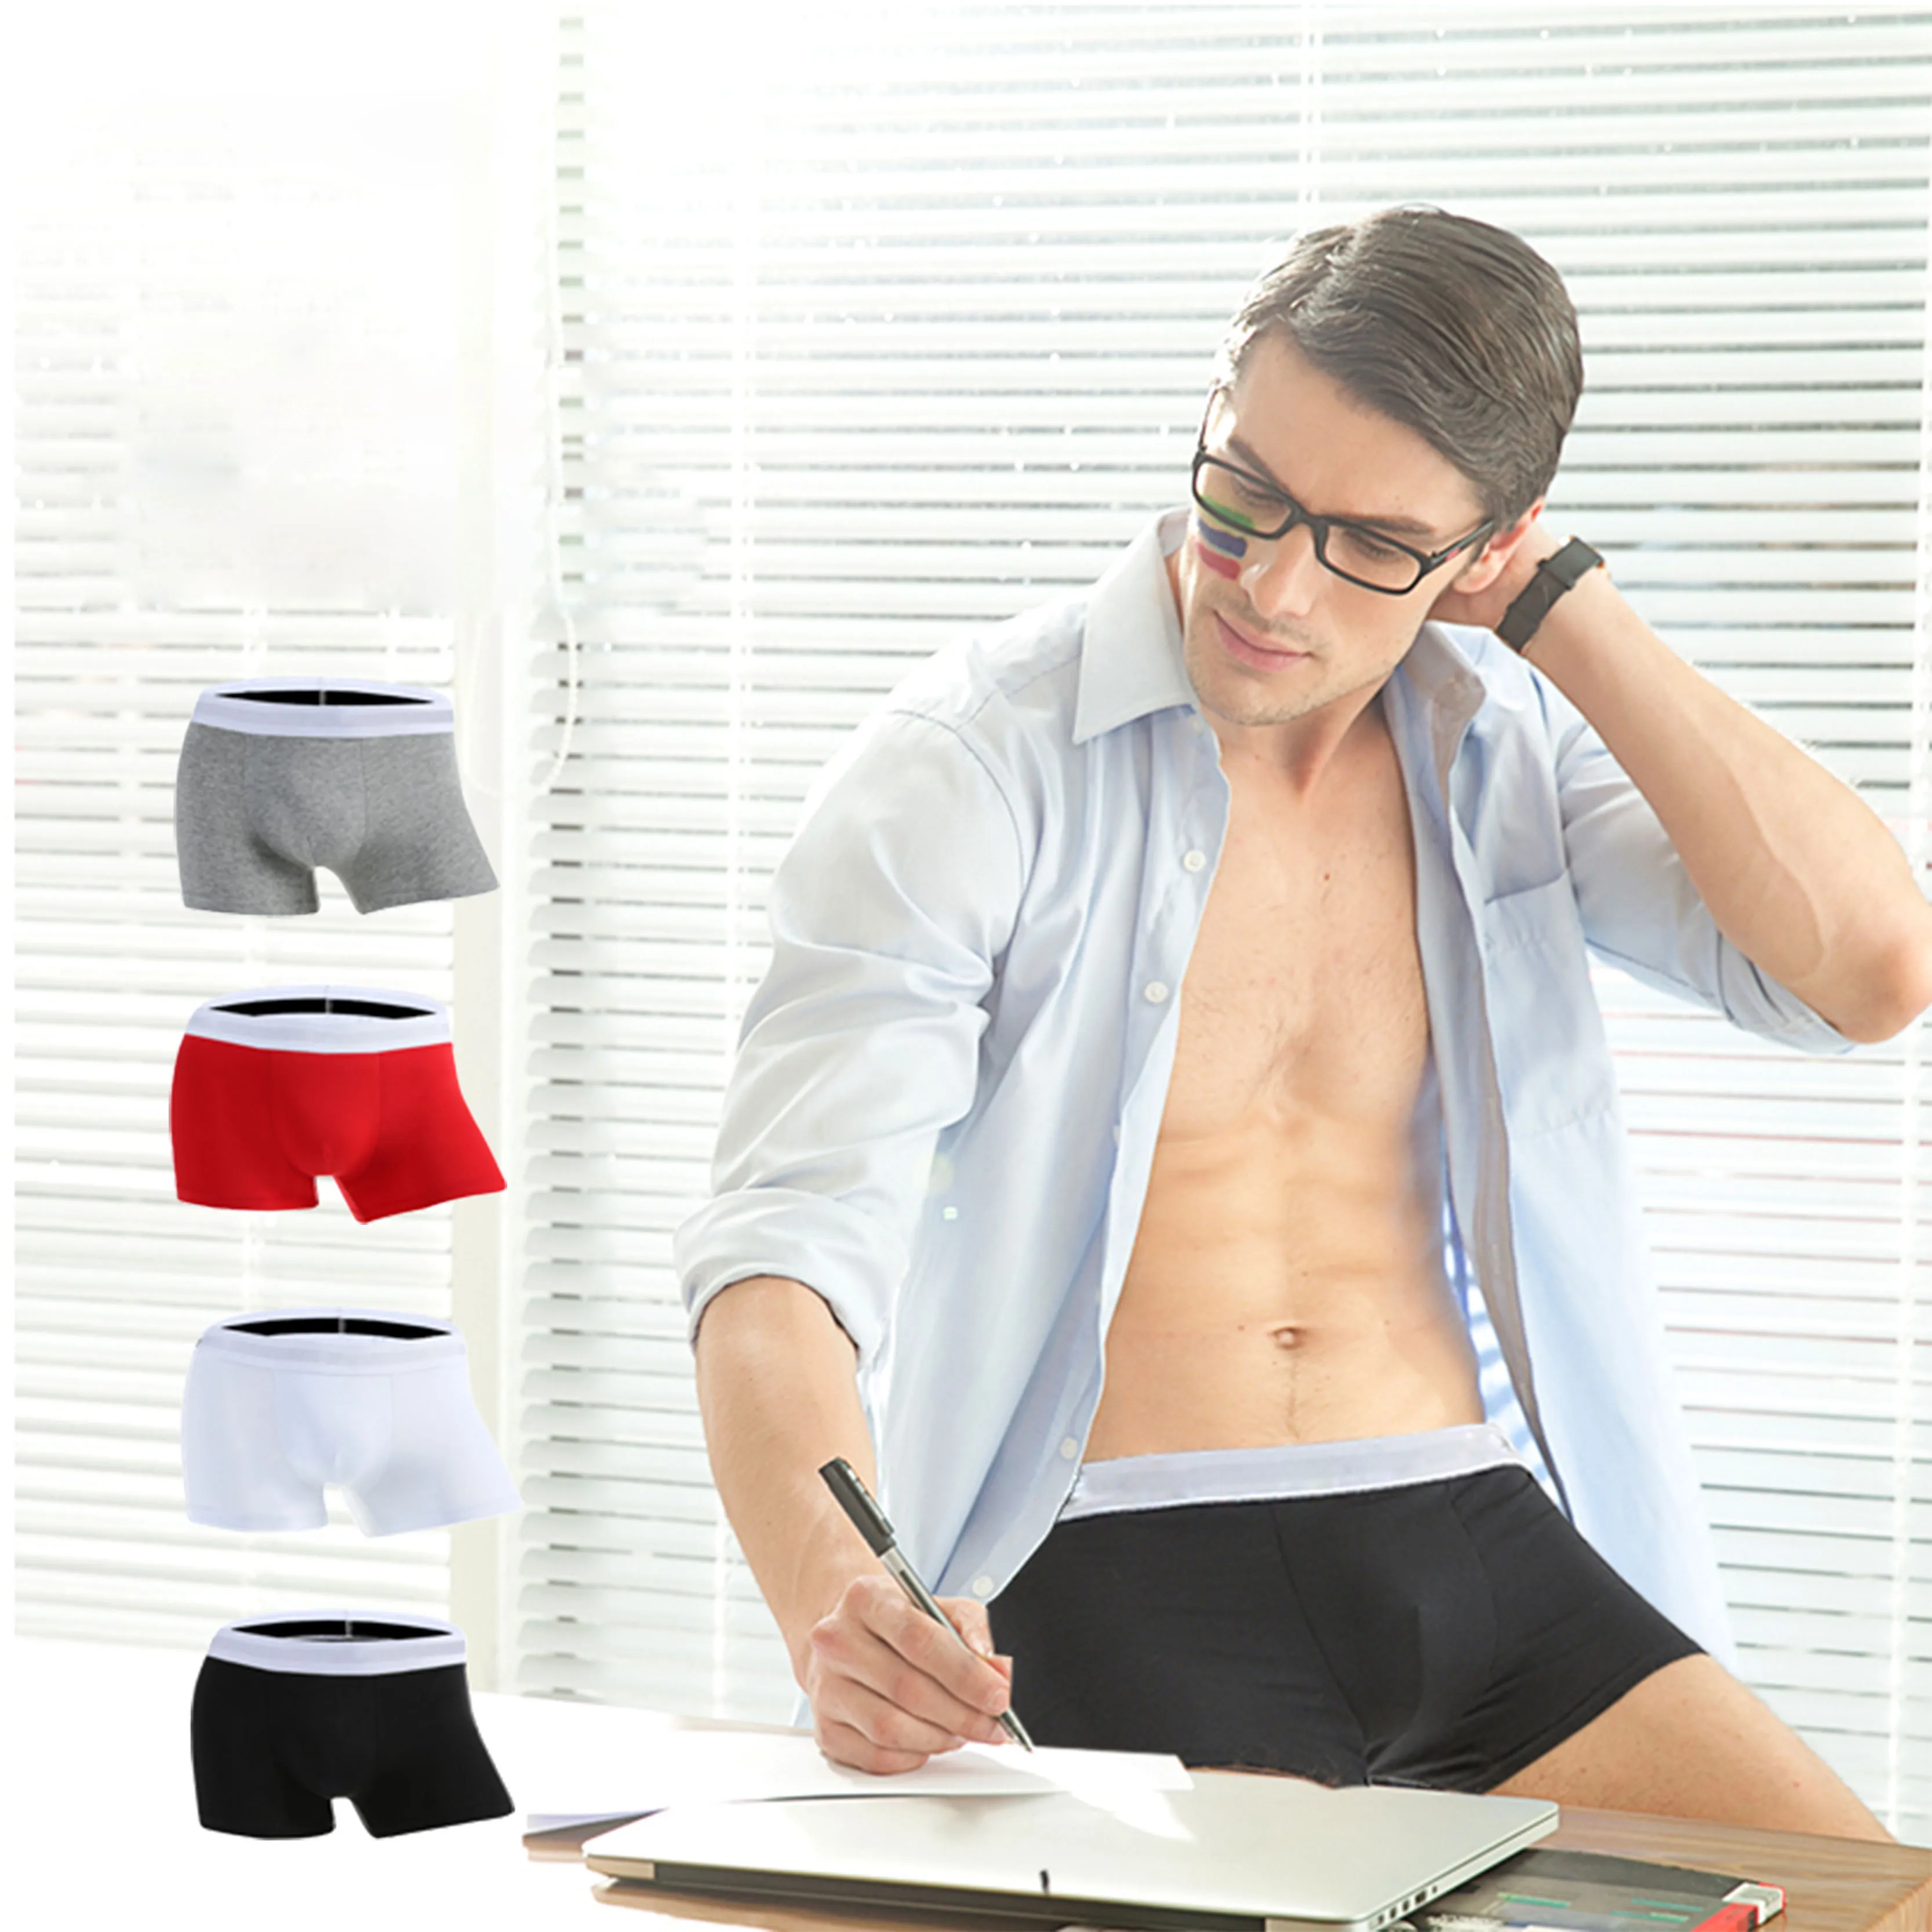 high-end breathable quick dry cotton briefs